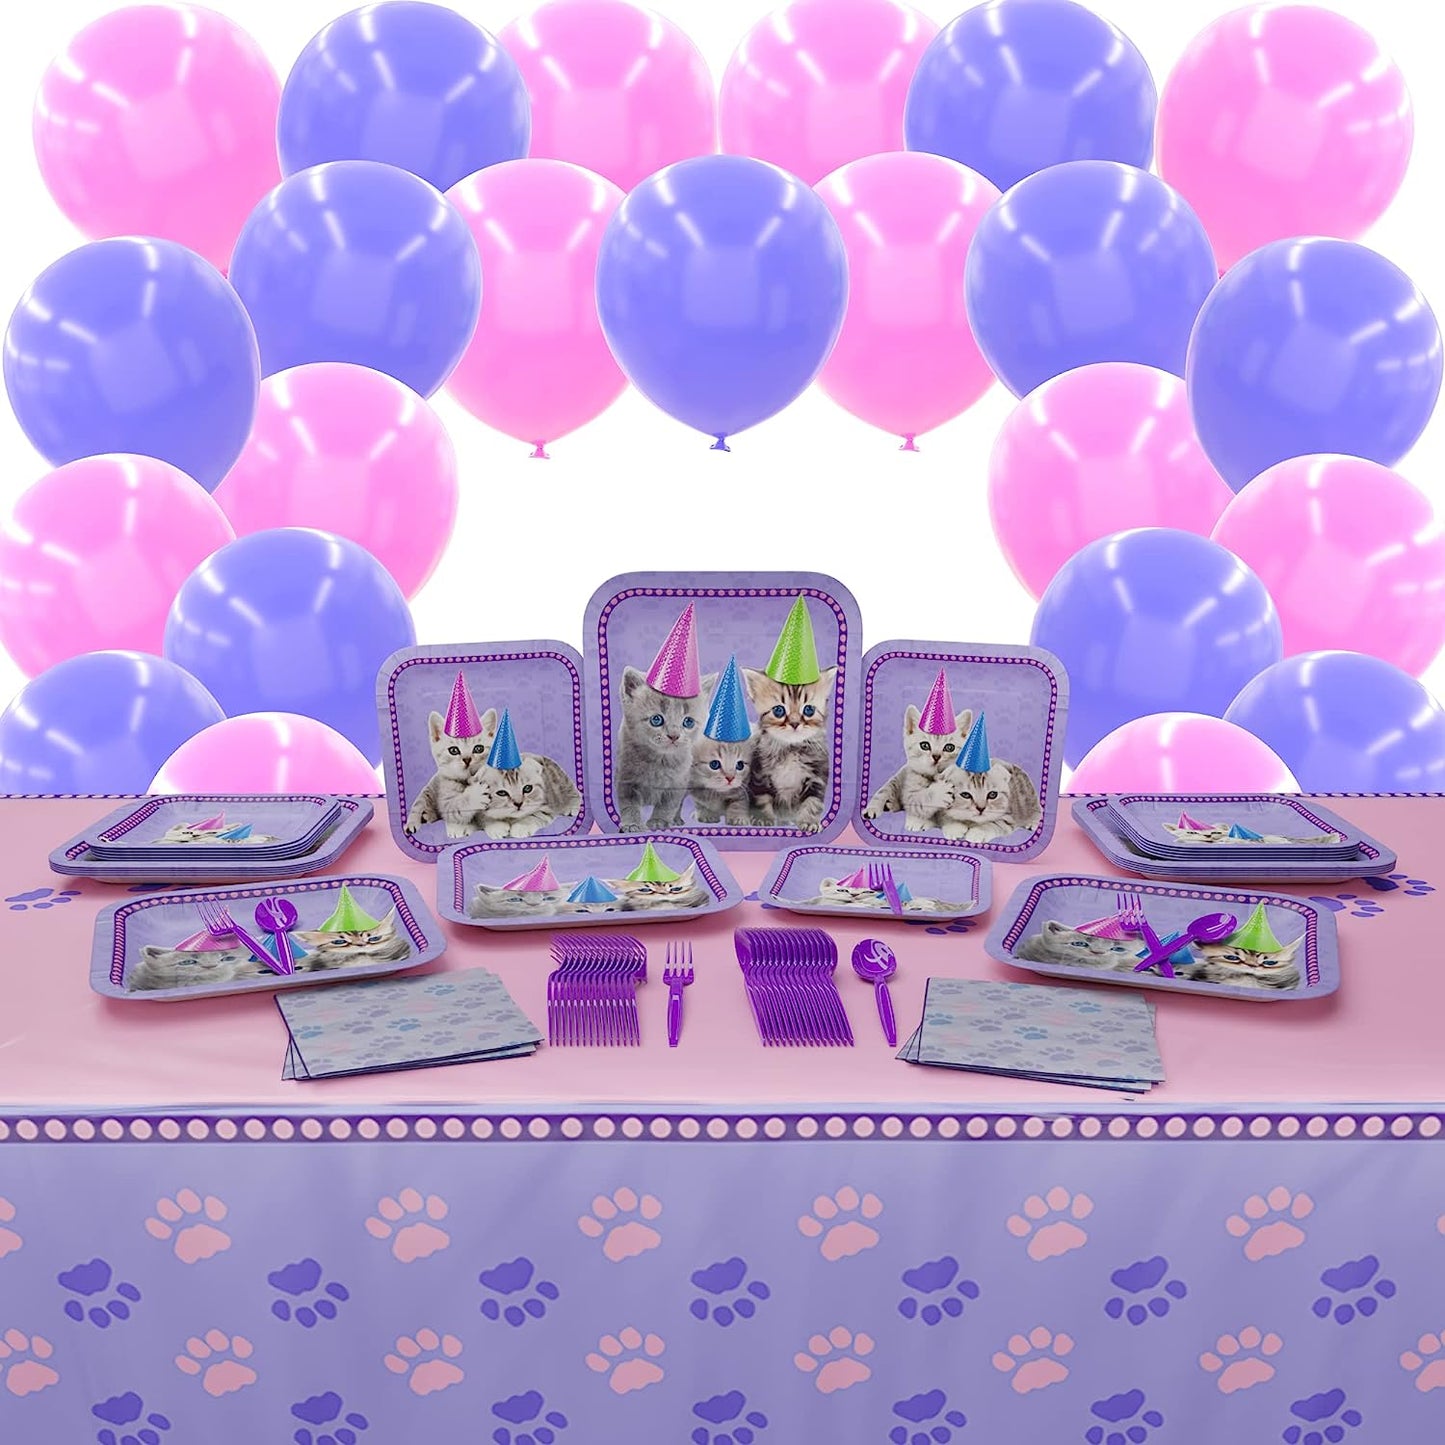 A party pack for a kitten-themed celebration including 7-inch paper dessert plates, paper dinner plates, and lunch napkins, all featuring cute kitten illustrations. There are also purple plastic spoons and forks, lavender and pink 10-inch balloons, and a 108"x54" kitten table cover.